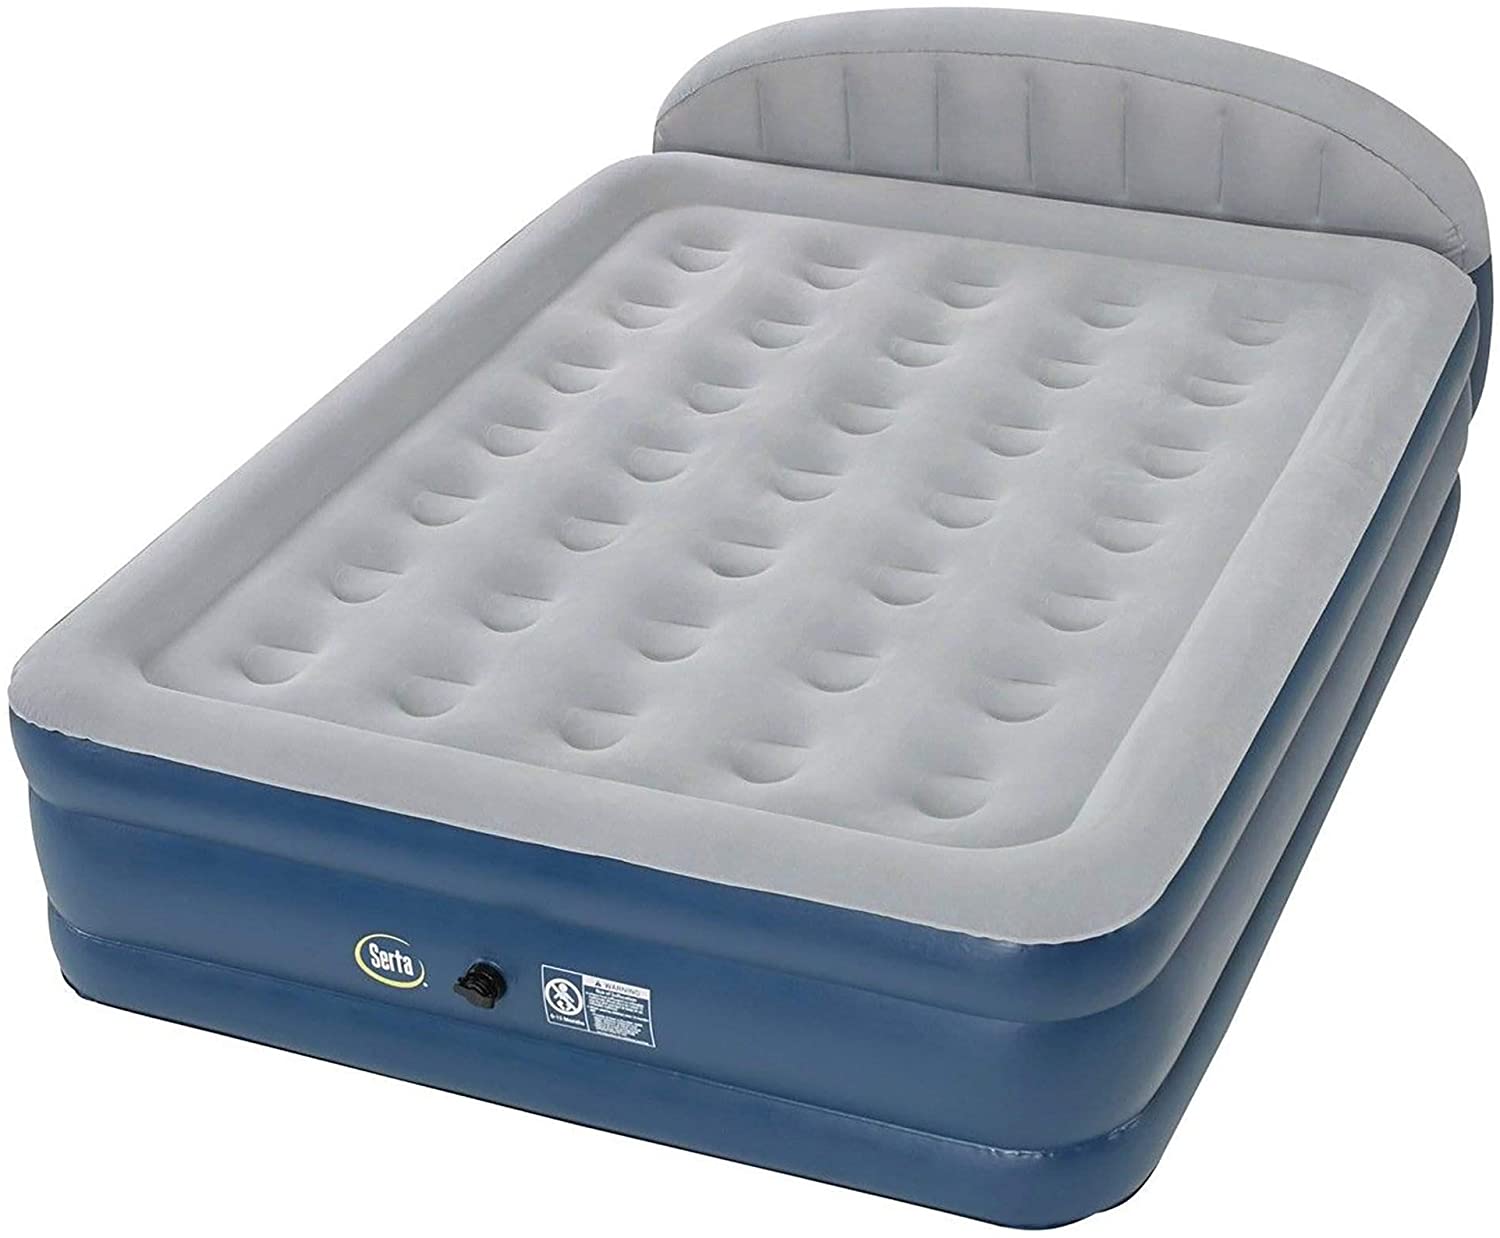 air mattress with headboard and frame